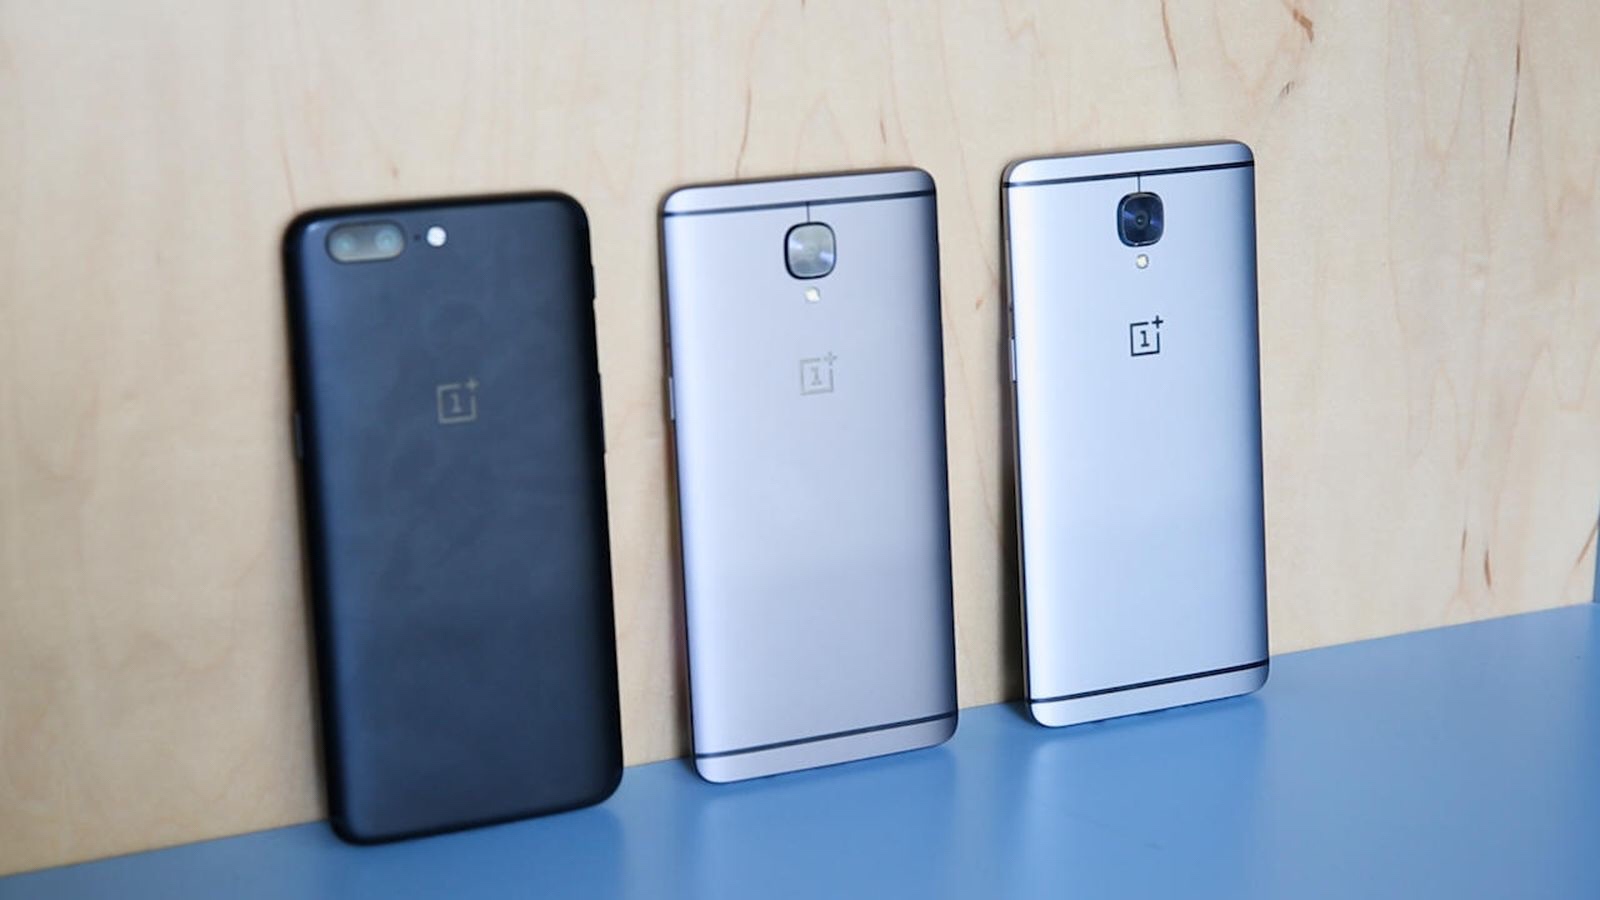 OnePlus confirms credit card breach and affects 40,000 customers as a result